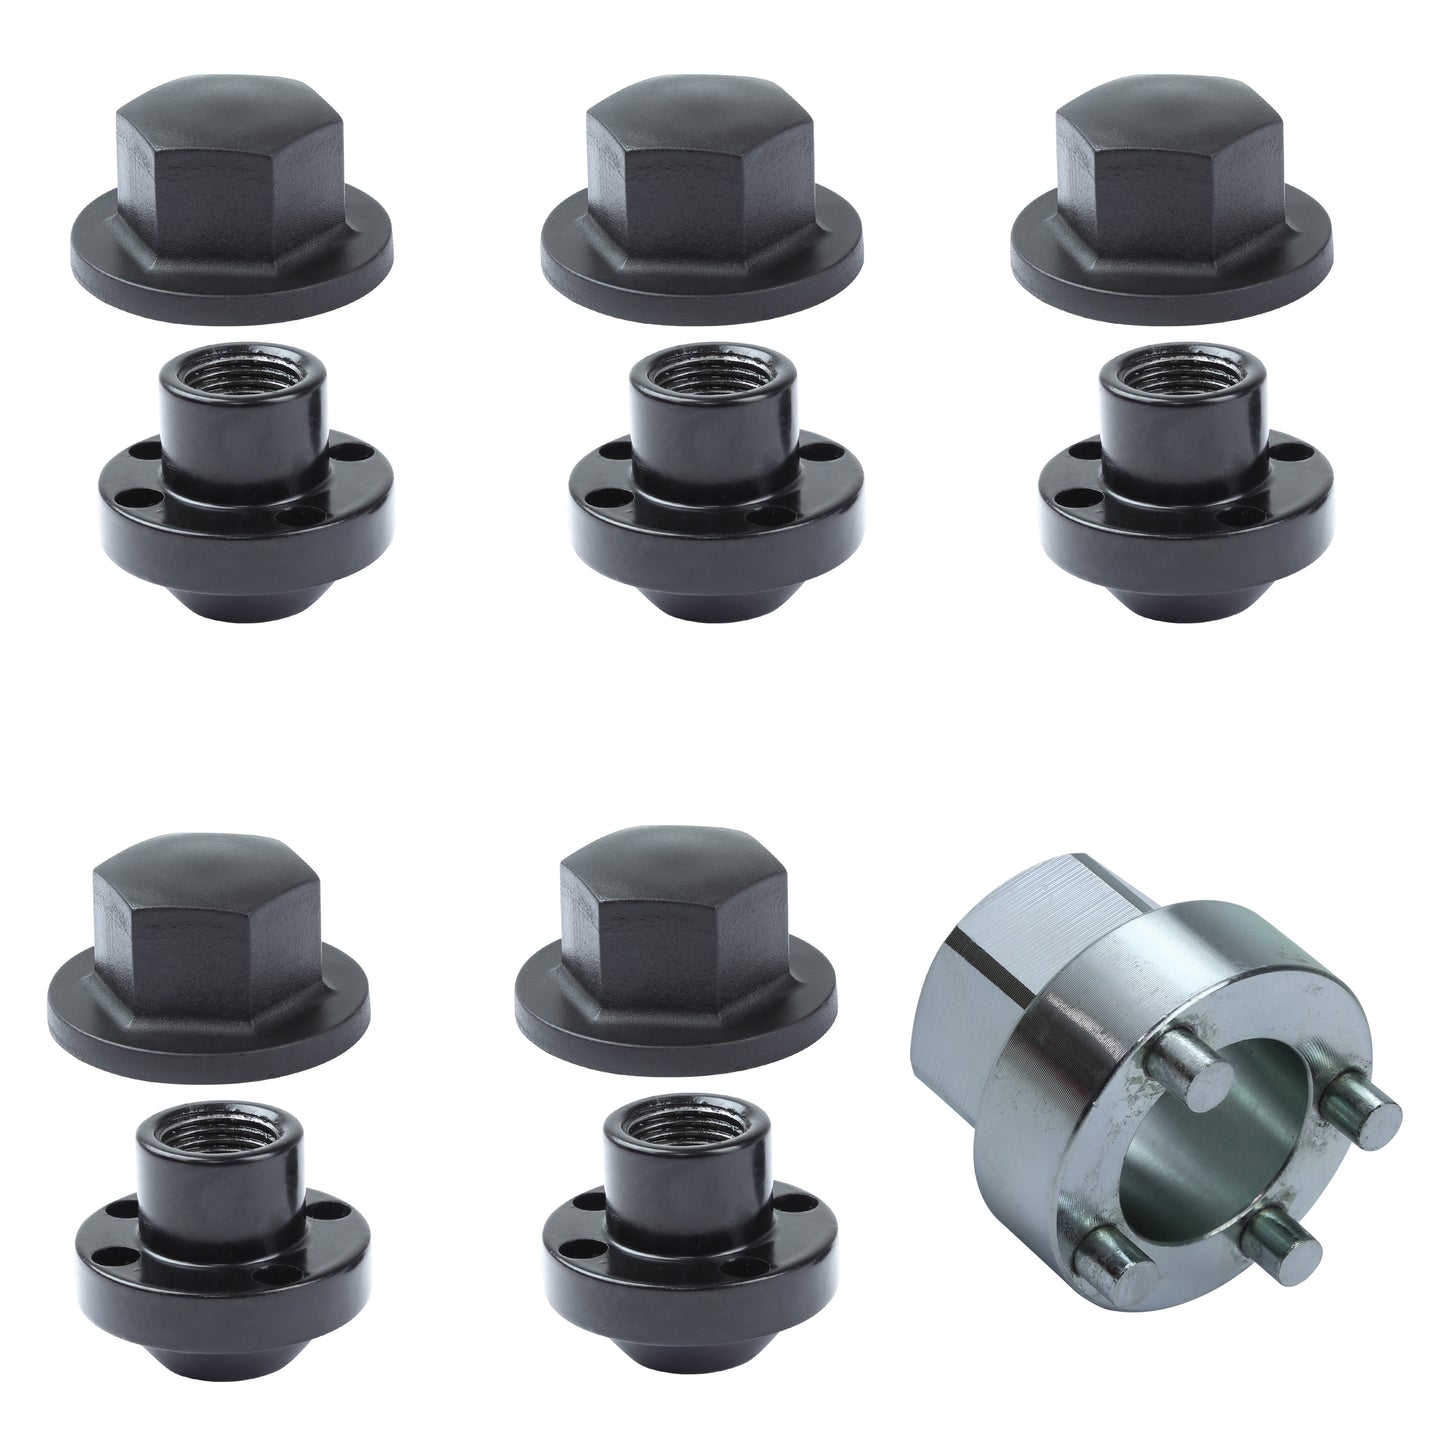 Locking Wheel Nut Kit for Land Rover Discovery 1 Steel Wheels